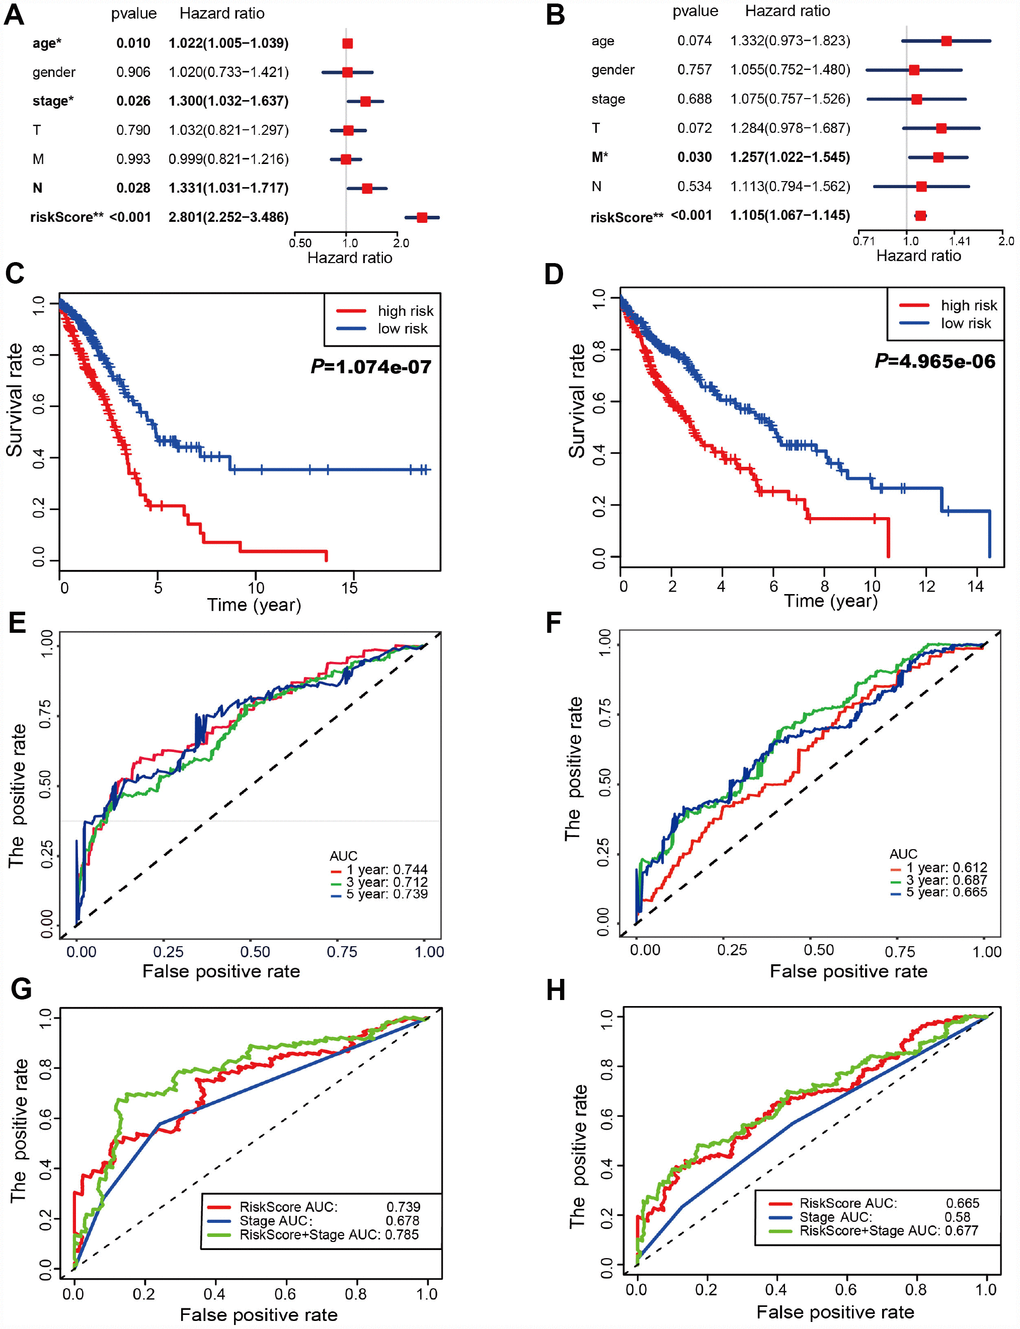 Autophagy-associated gene signature was significantly related to survival in lung cancer. (A–B) Multivariate Cox regression analysis. The autophagy-associated gene signature was an independent predictor of prognosis in TCGA-LUAD (A) and TCGA- LUSC (B). (C–D) Kaplan-Meier analysis of TCGA lung cancer patients stratified by the median risk score. (C) The high risk scores were related to poor overall survival in TCGA-LUAD. (D) The high risk scores were correlated with poor overall survival in TCGA-LUSC. (E–F) Receiver operating characteristic (ROC) analysis of the sensitivity and specificity of the OS for the 22-gene risk score in TCGA-LUAD (E) and 11-gene risk score in TCGA-LUSC (F). The combination of stage and risk score could better predict prognosis in TCGA-LUAD (G) and TCGA-LUSC (H) than either one alone.